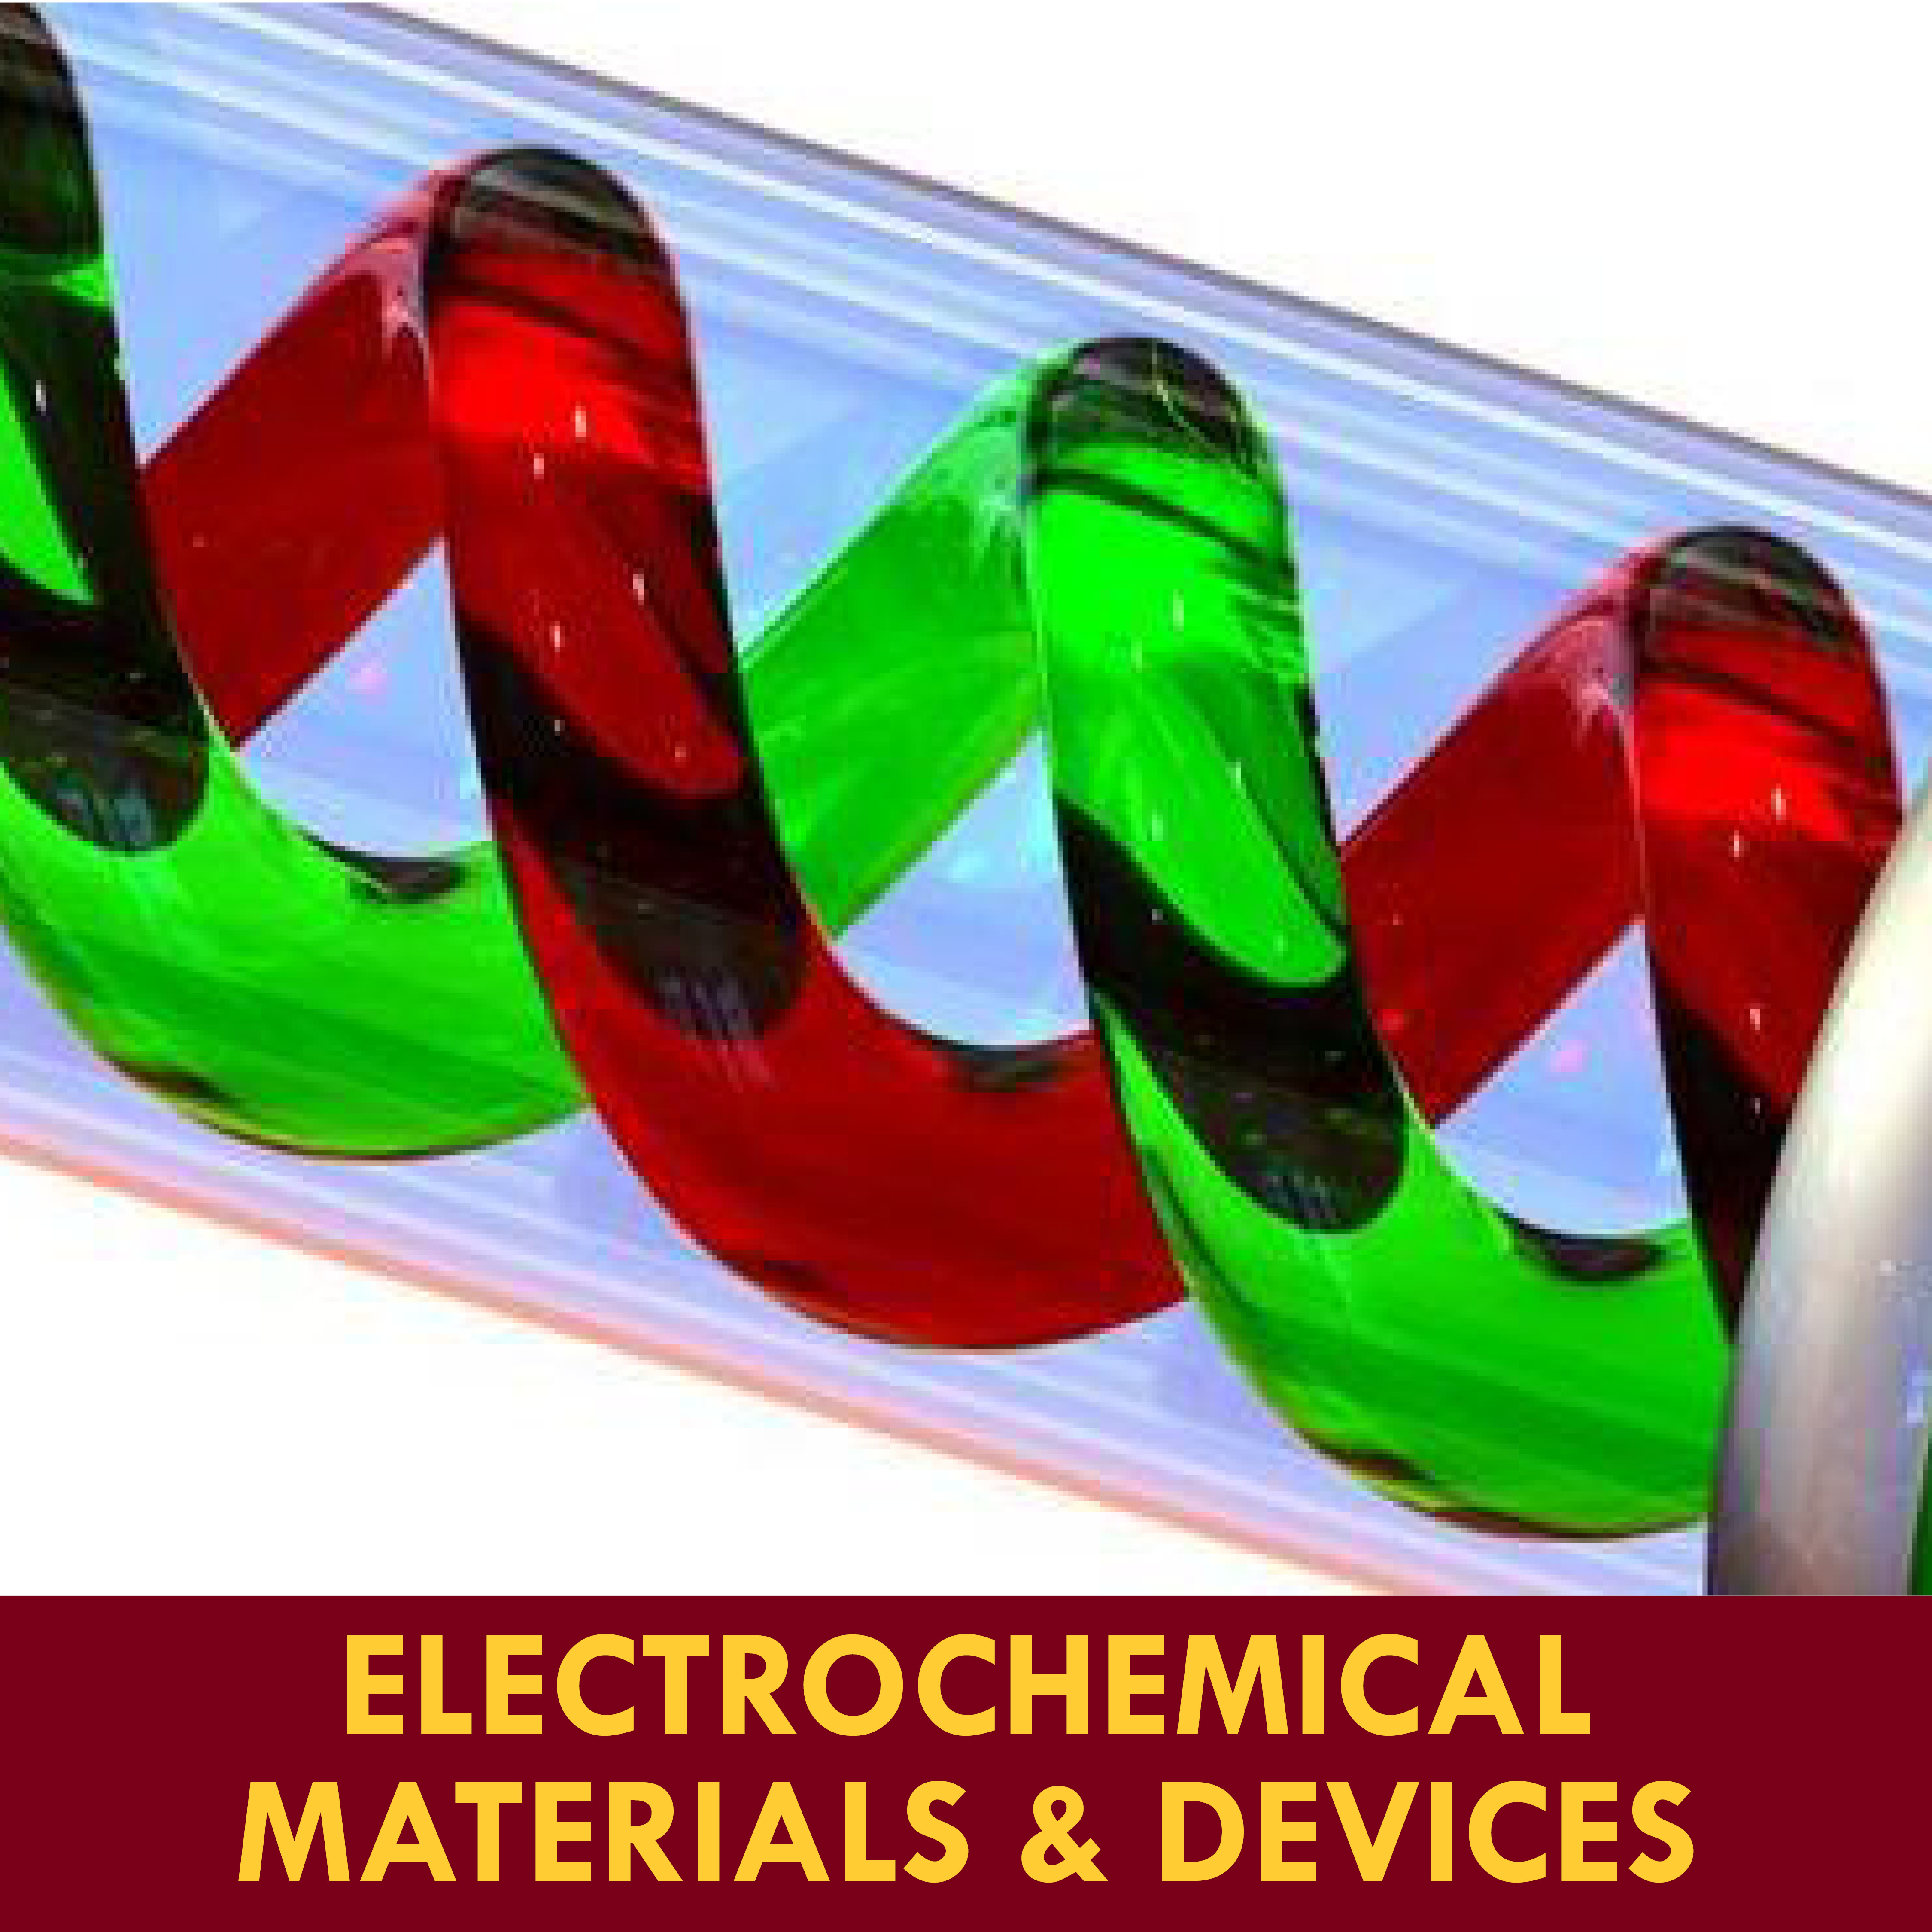 Electrochemical Materials & Devices